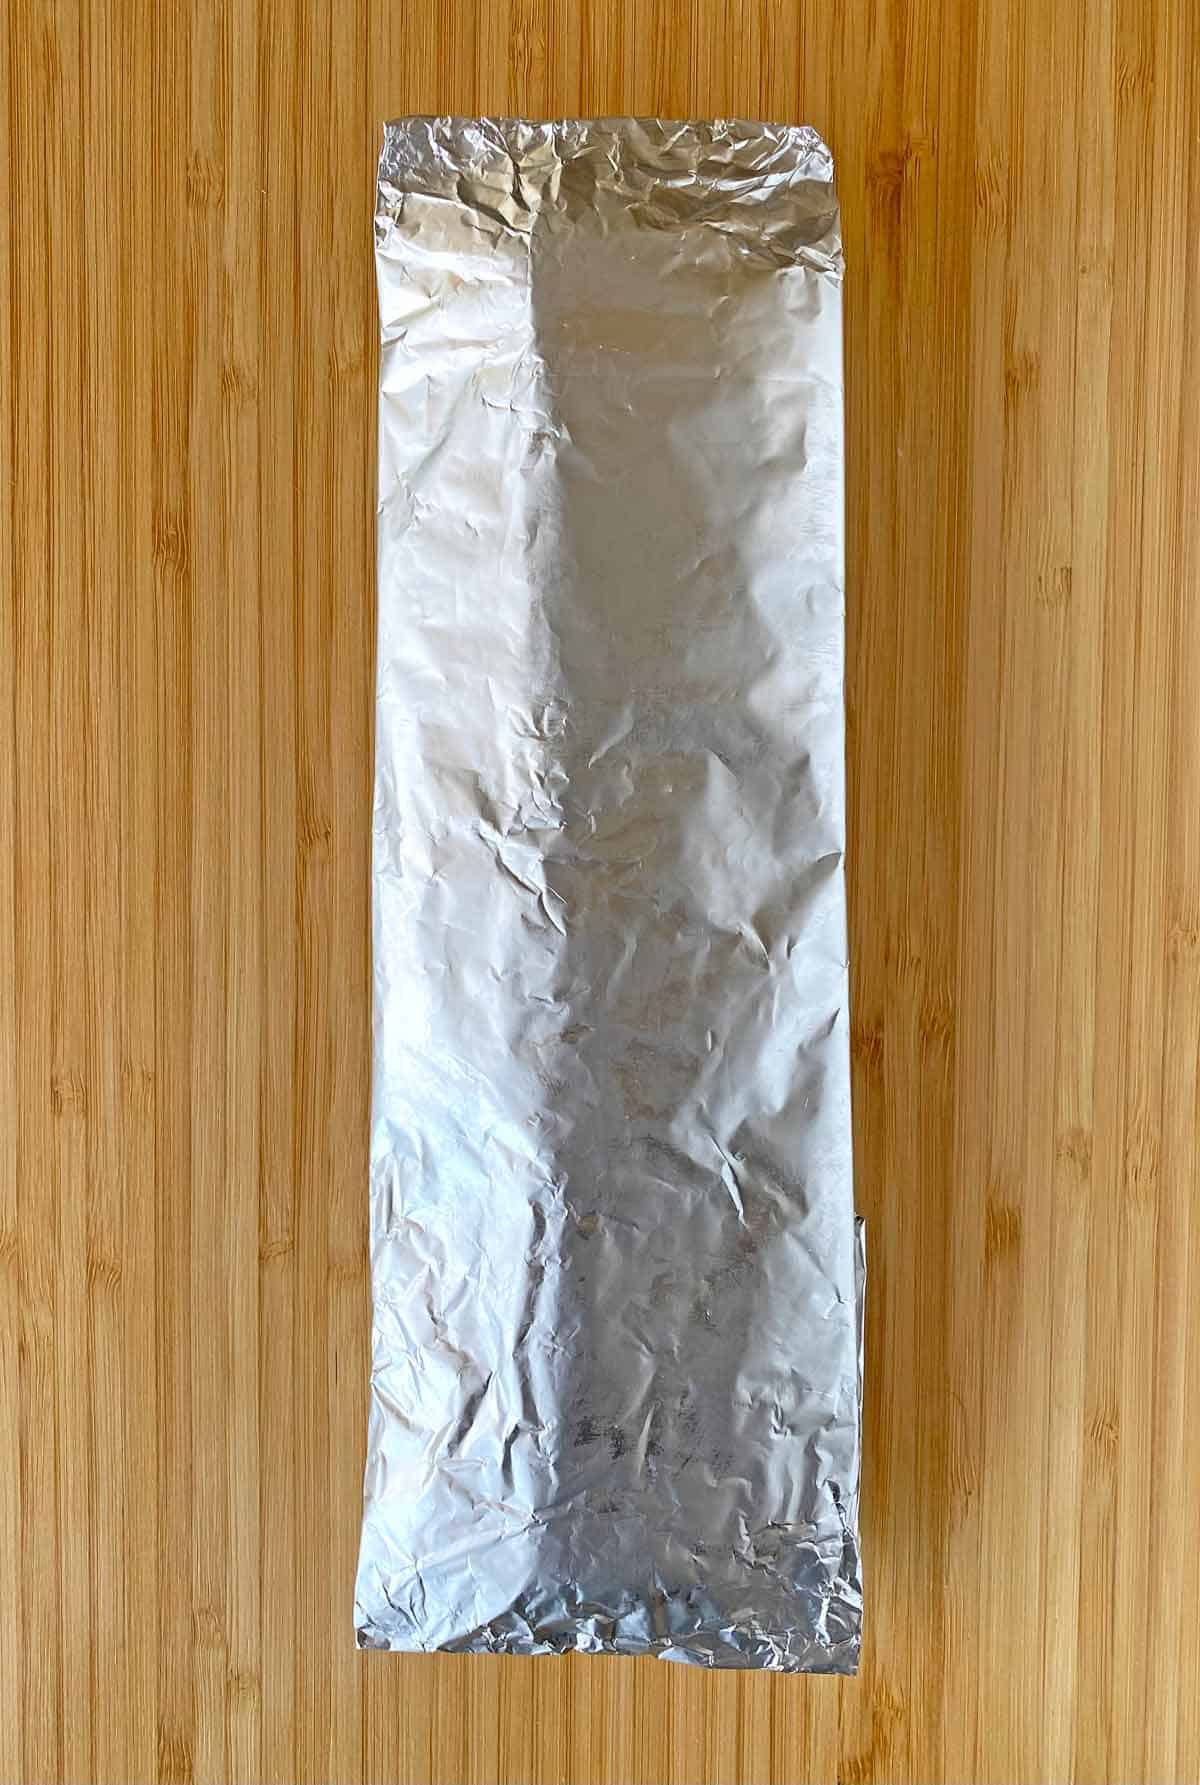 A foil wrapped package of uncooked bacon.